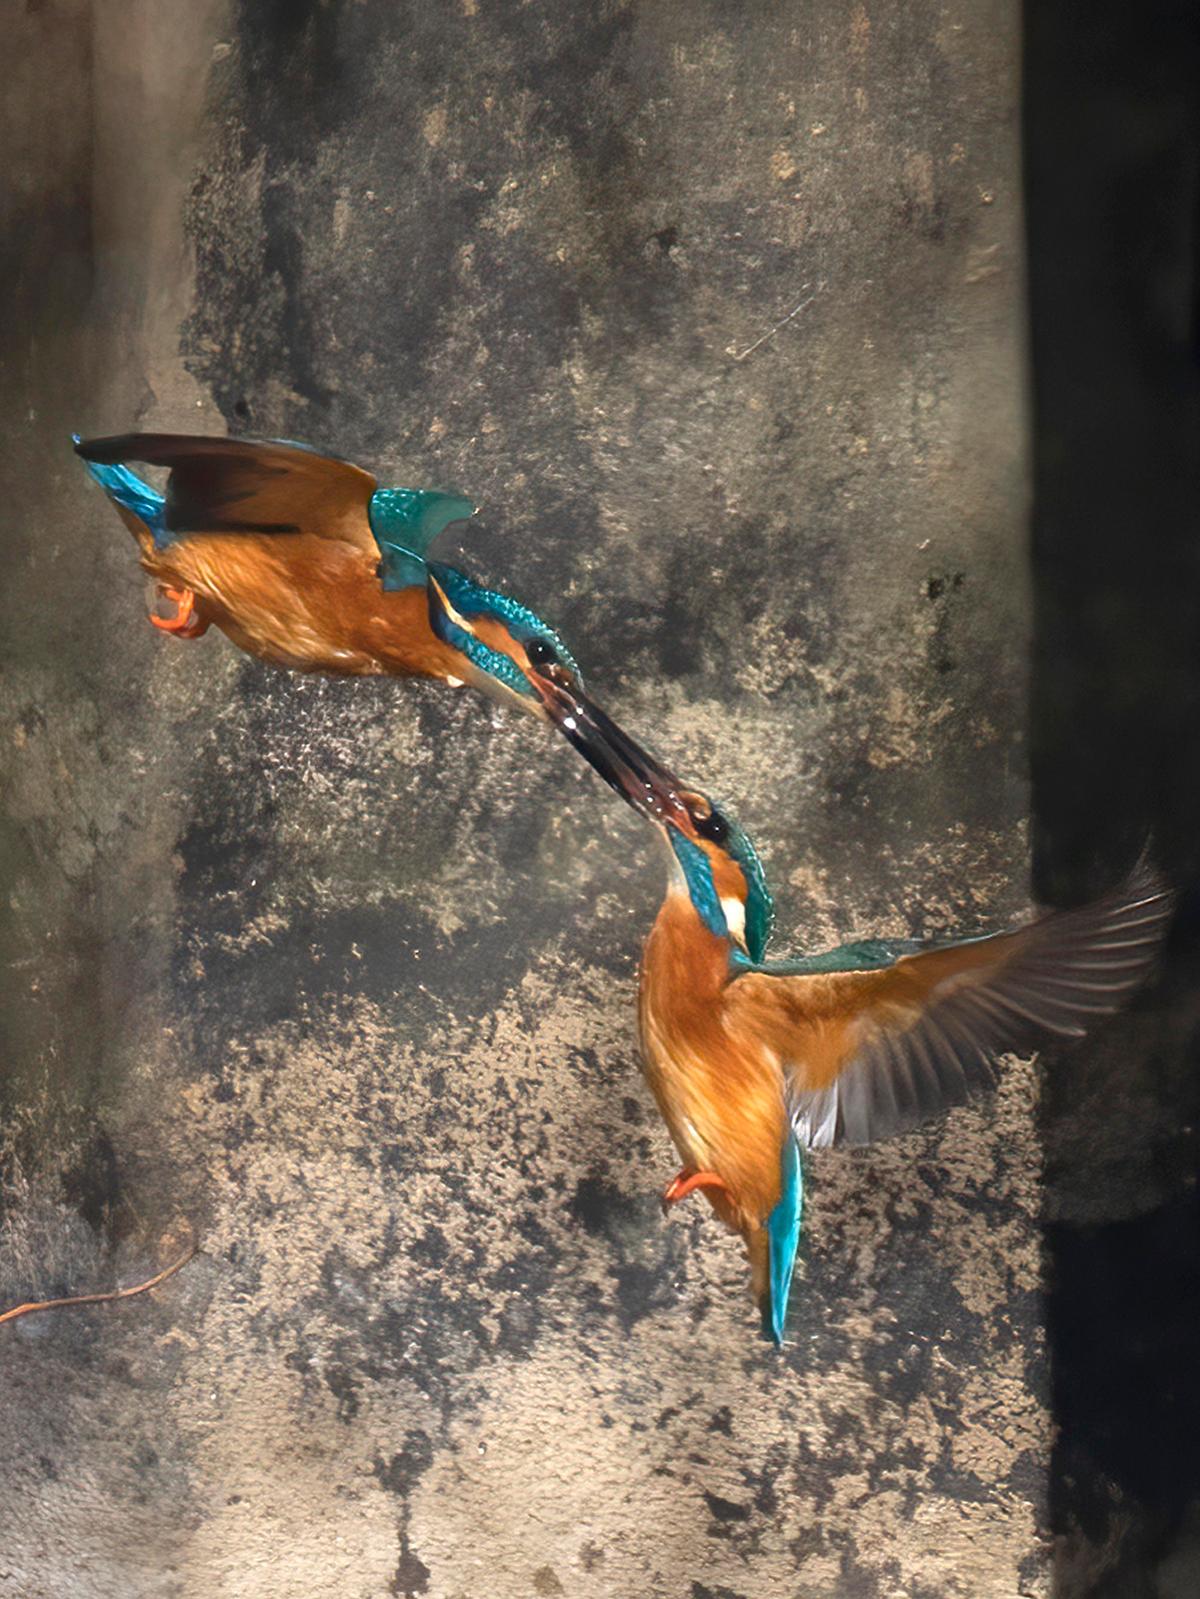 The pictures show the two brightly colored kingfishers, beaks locked in a ferocious "dogfight." (Caters News)